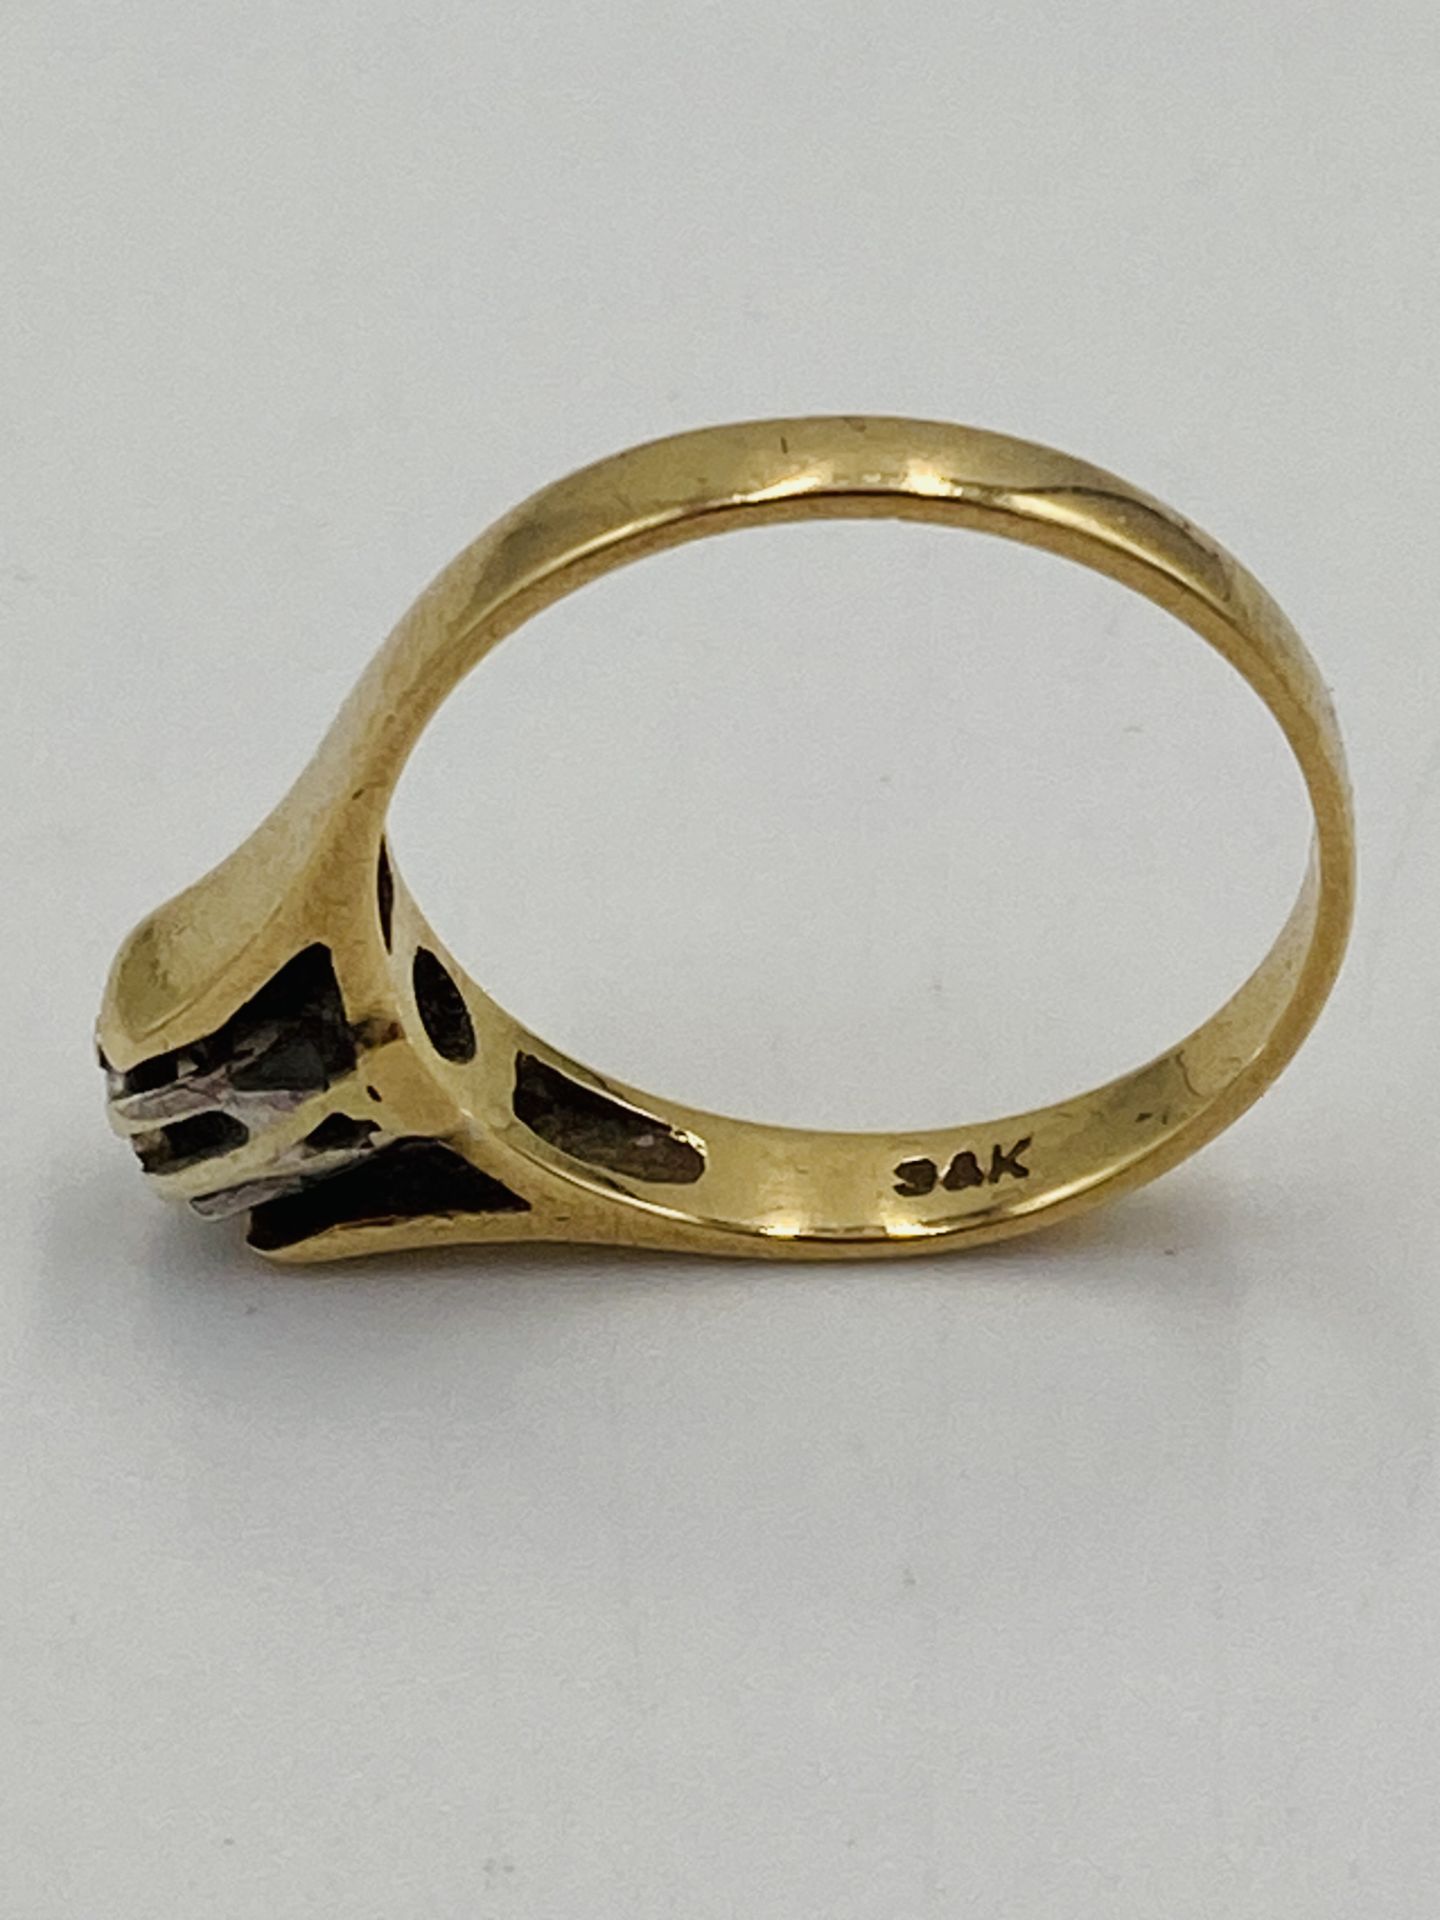 9ct gold solitaire ring - Image 6 of 6